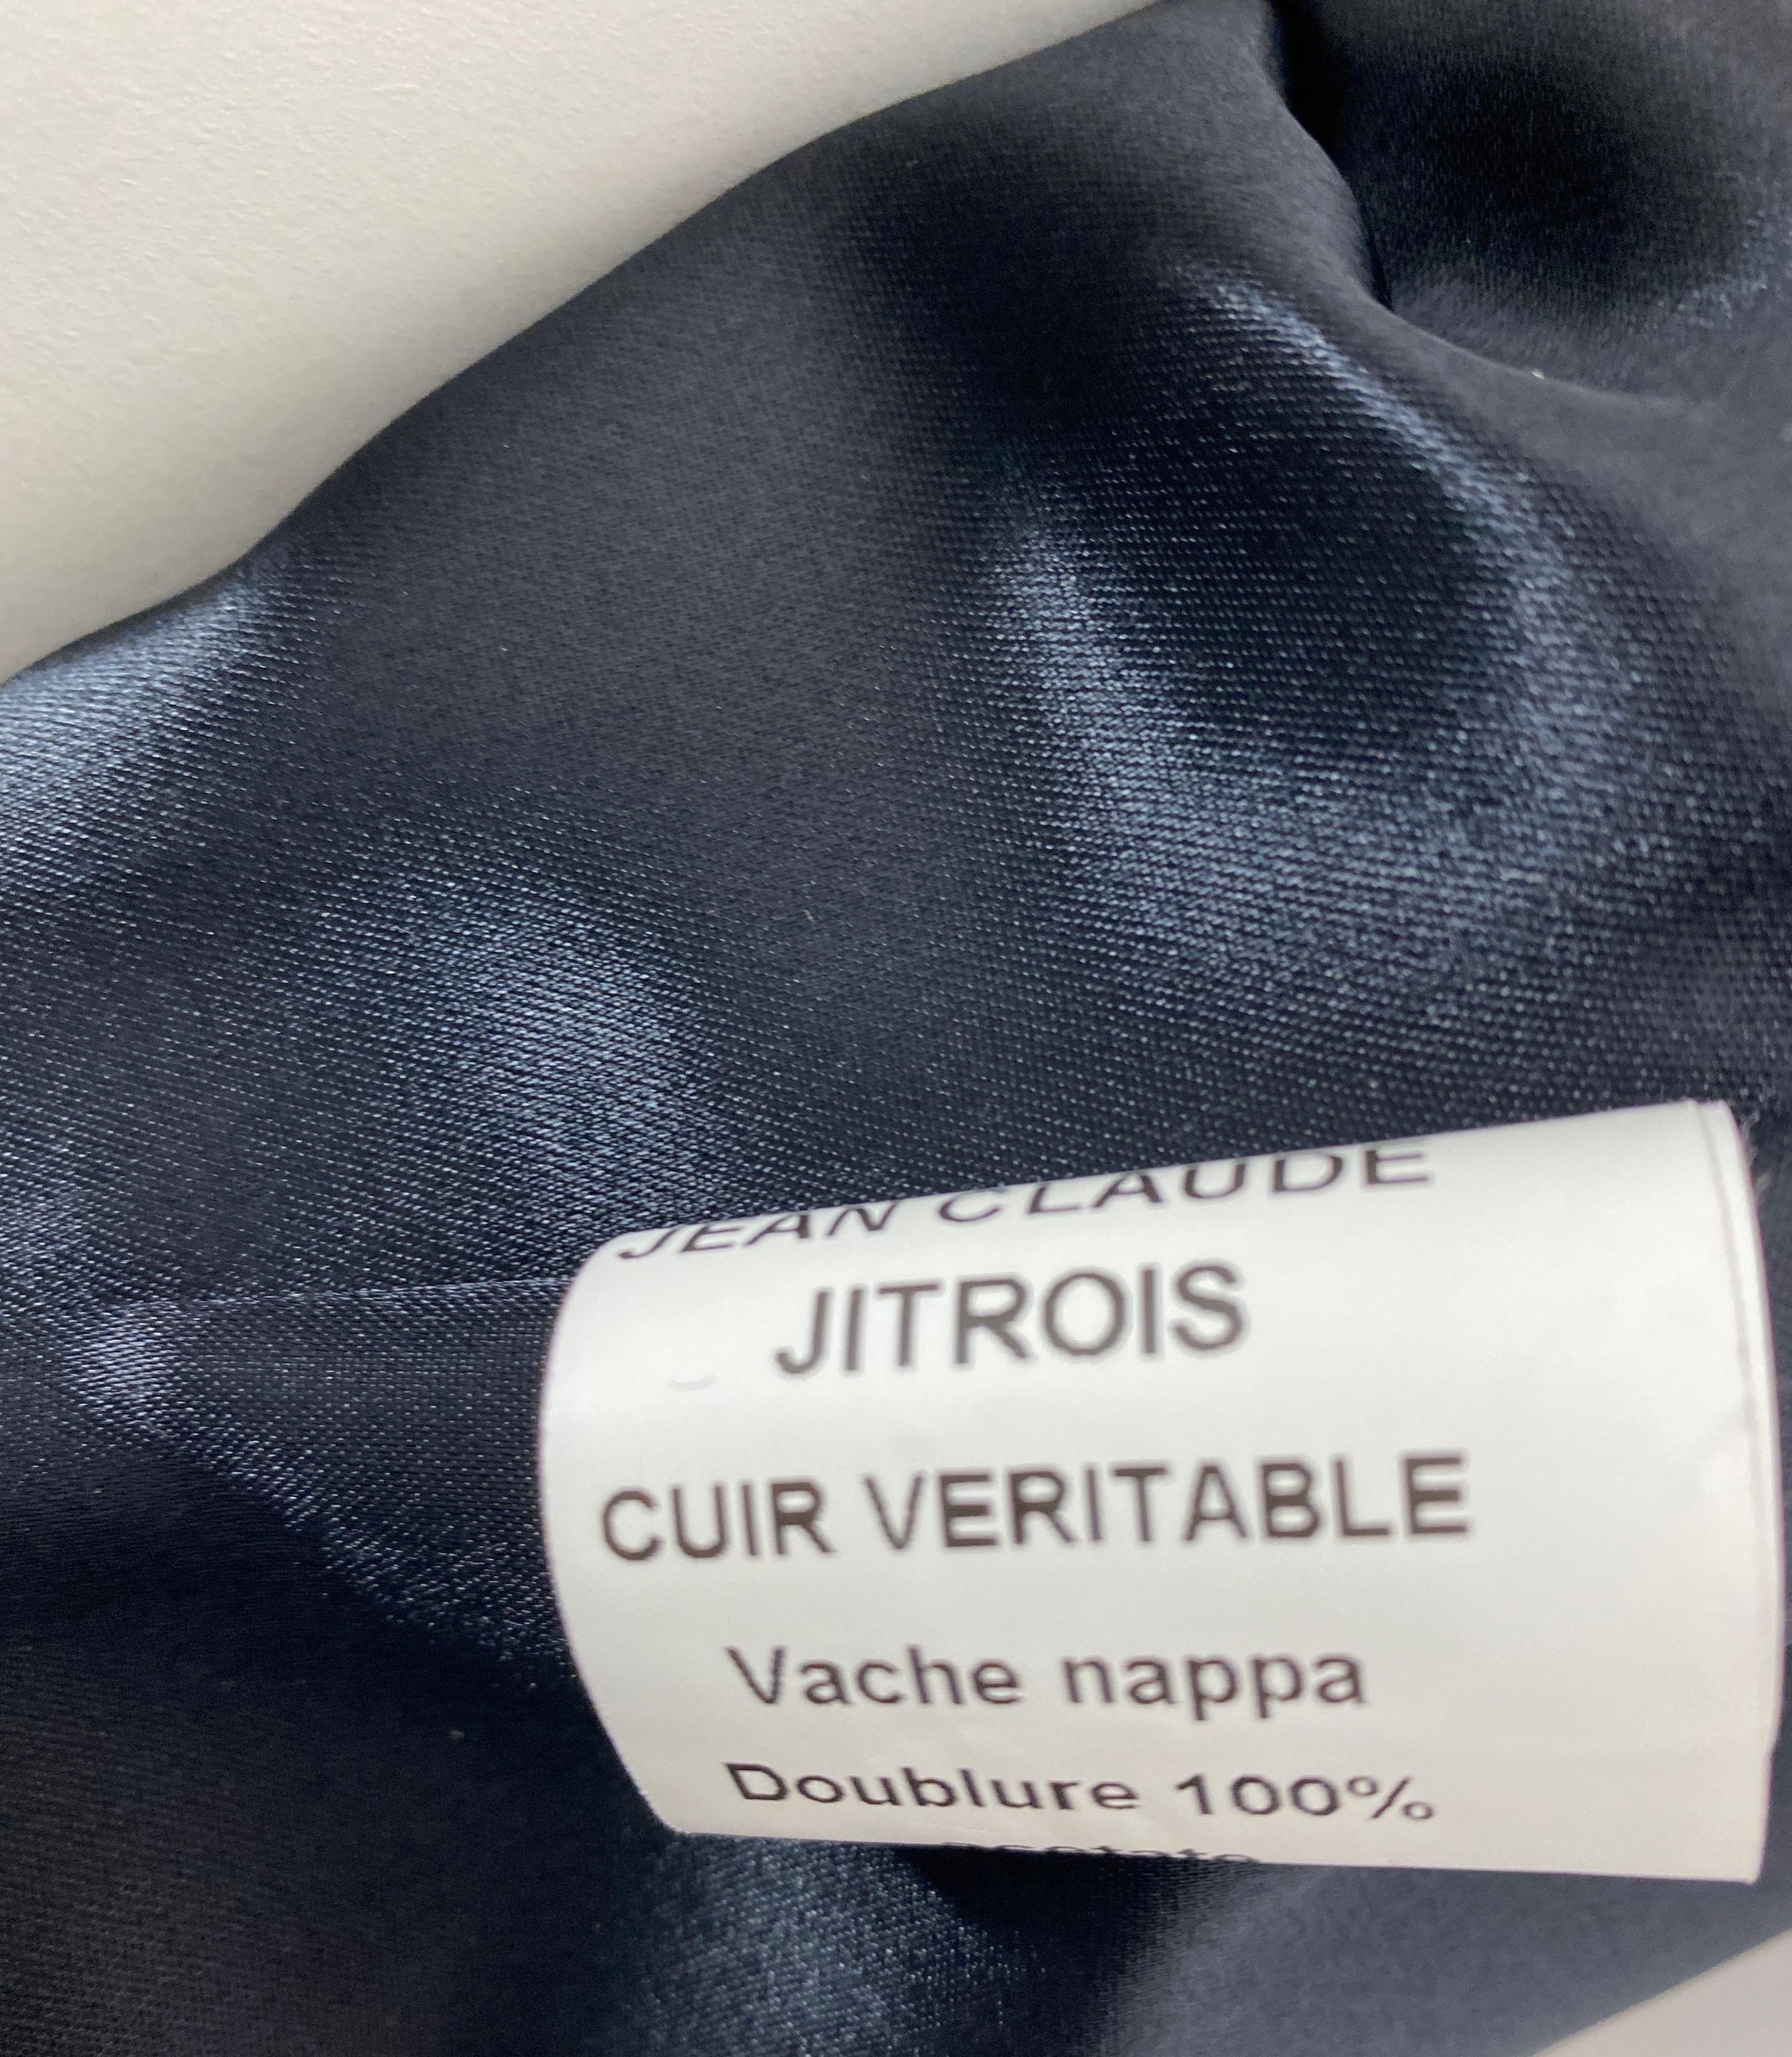 Jean Claude Jitrois Black Nappa Leather Coat with Fox-Size 38 For Sale 14